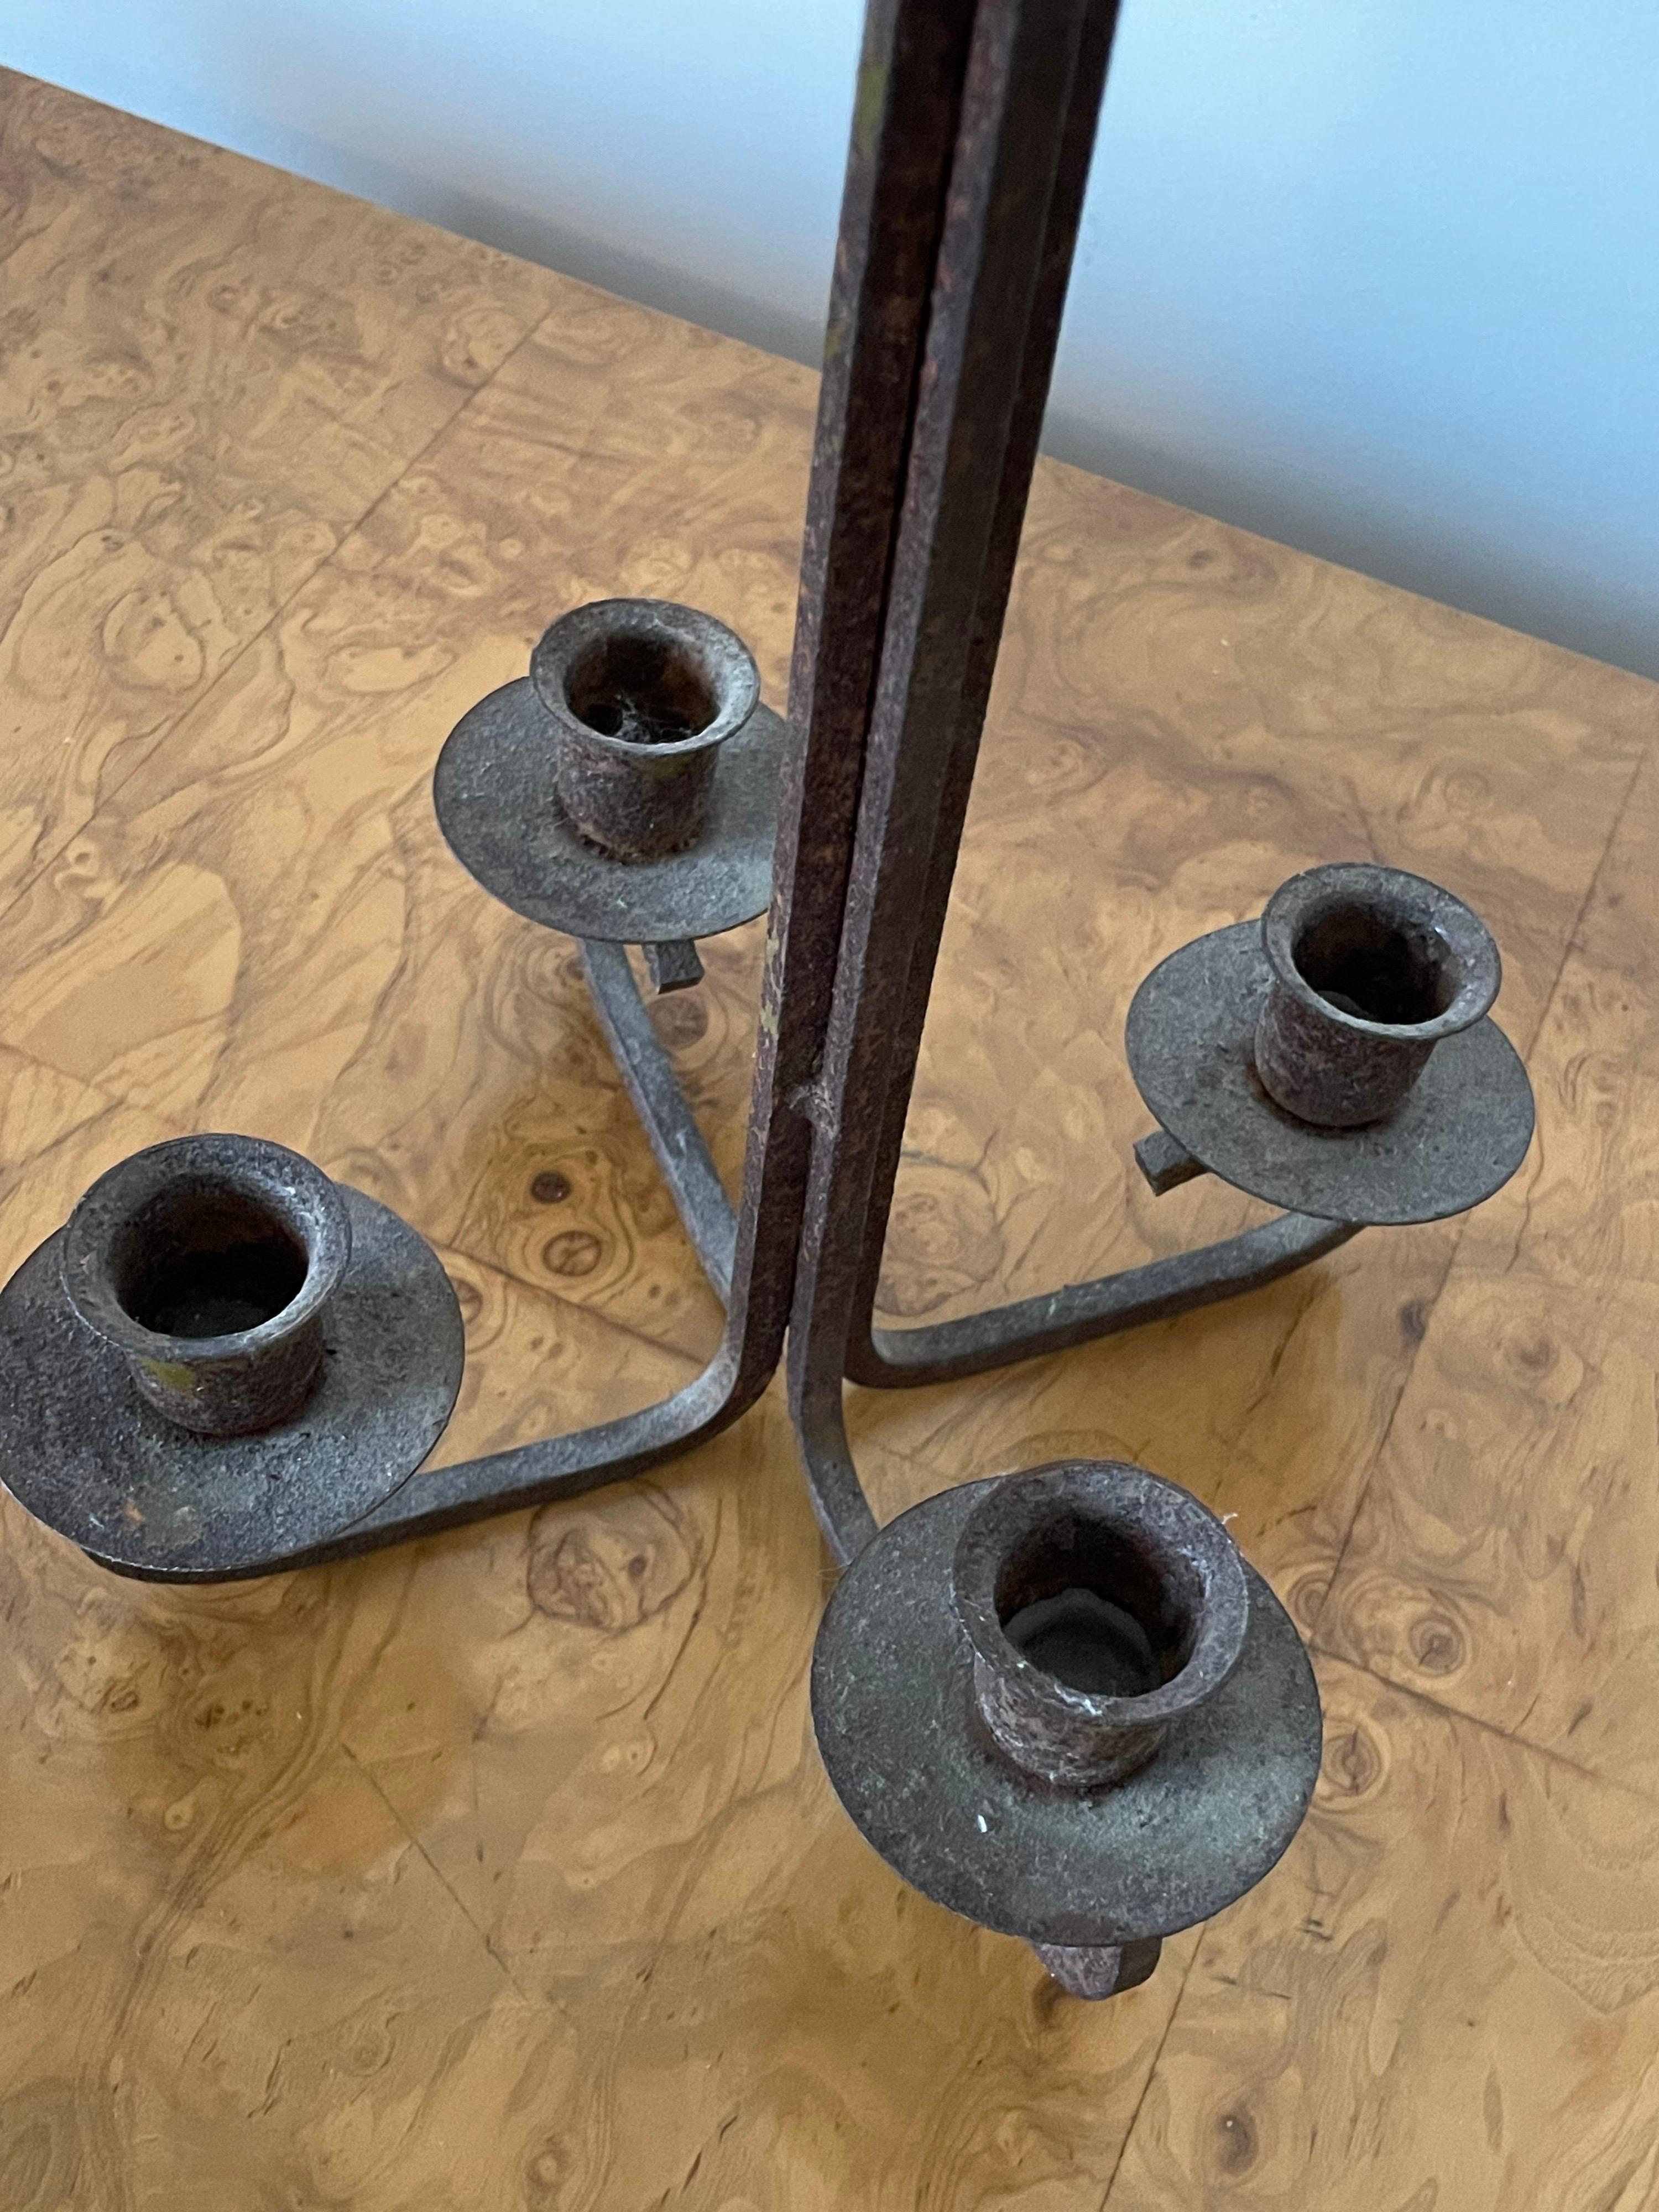 Unusual modernist candelabra which can be used table top or hung. Heavily patinated wrought iron. Four candlestick holders.